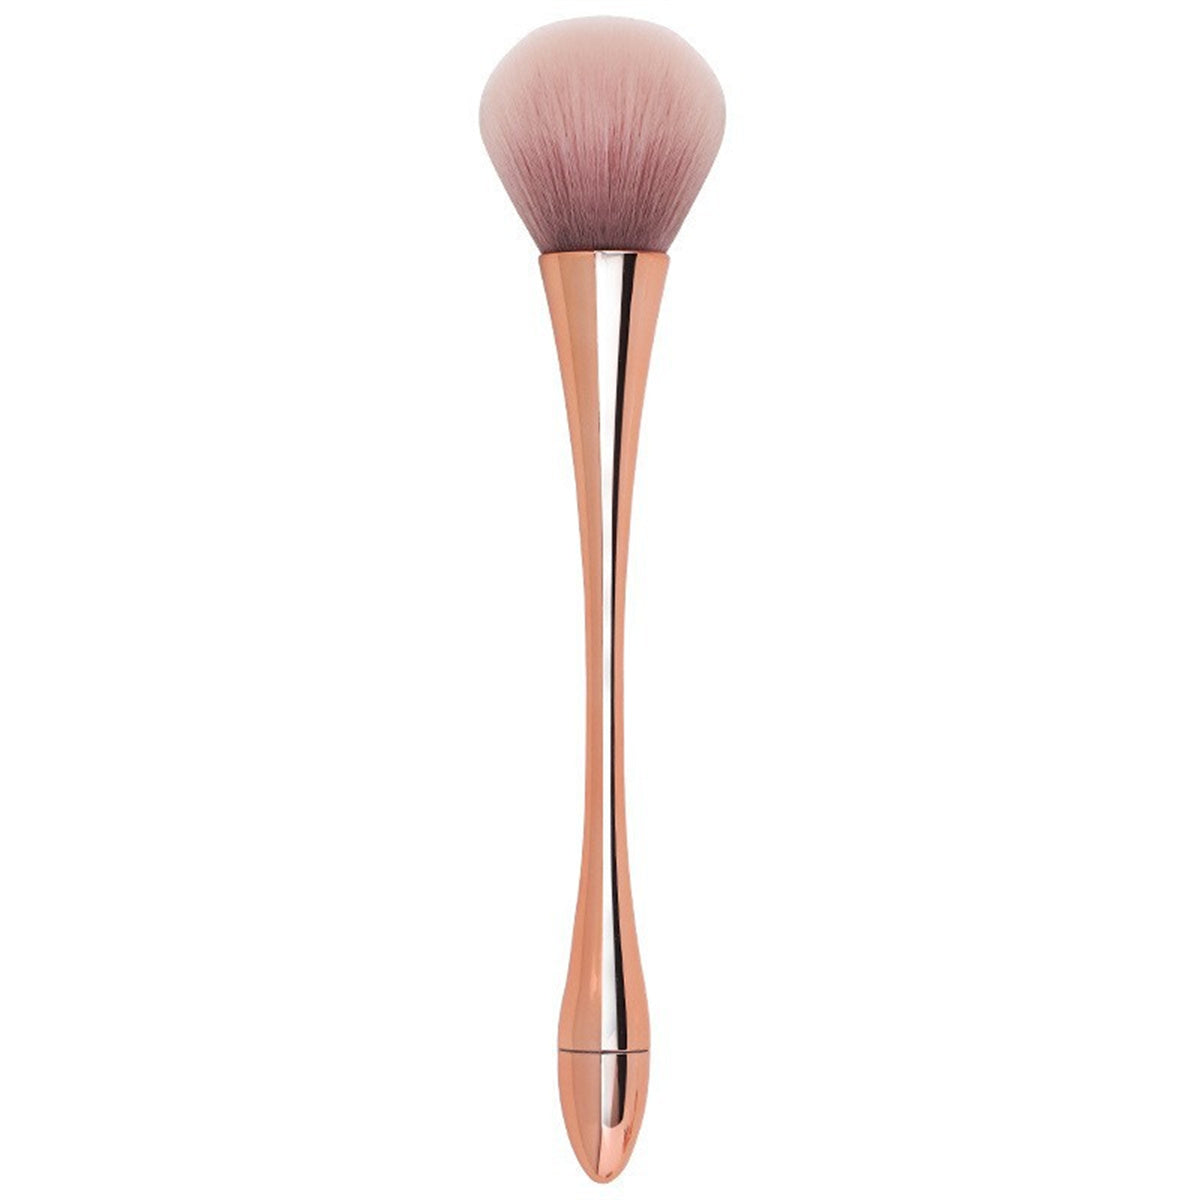 Super Large Mineral Powder Makeup Brushes Soft Fluffy Foundation Blush Brush for Daily Makeup